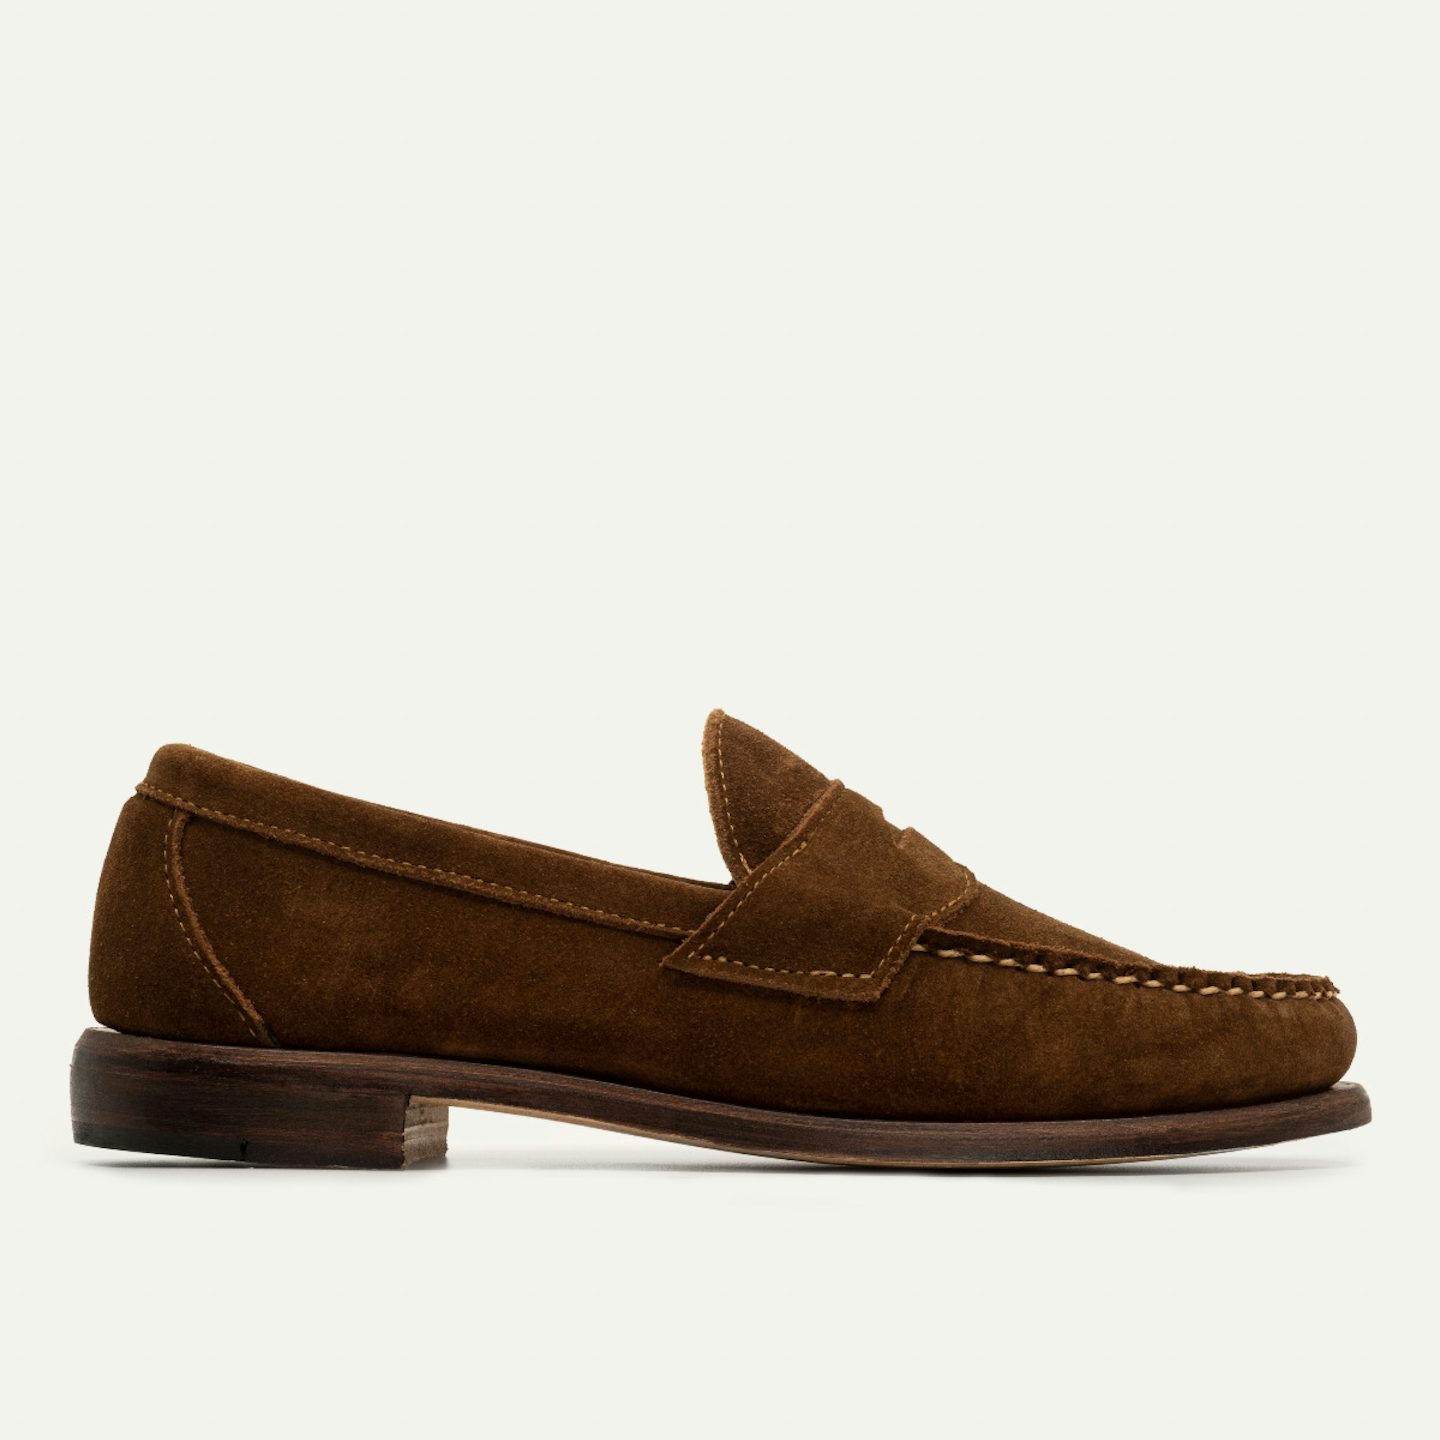 Loafer - Snuff Suede, Leather Sole with Toplift - Made USA | Oak Street Bootmakers